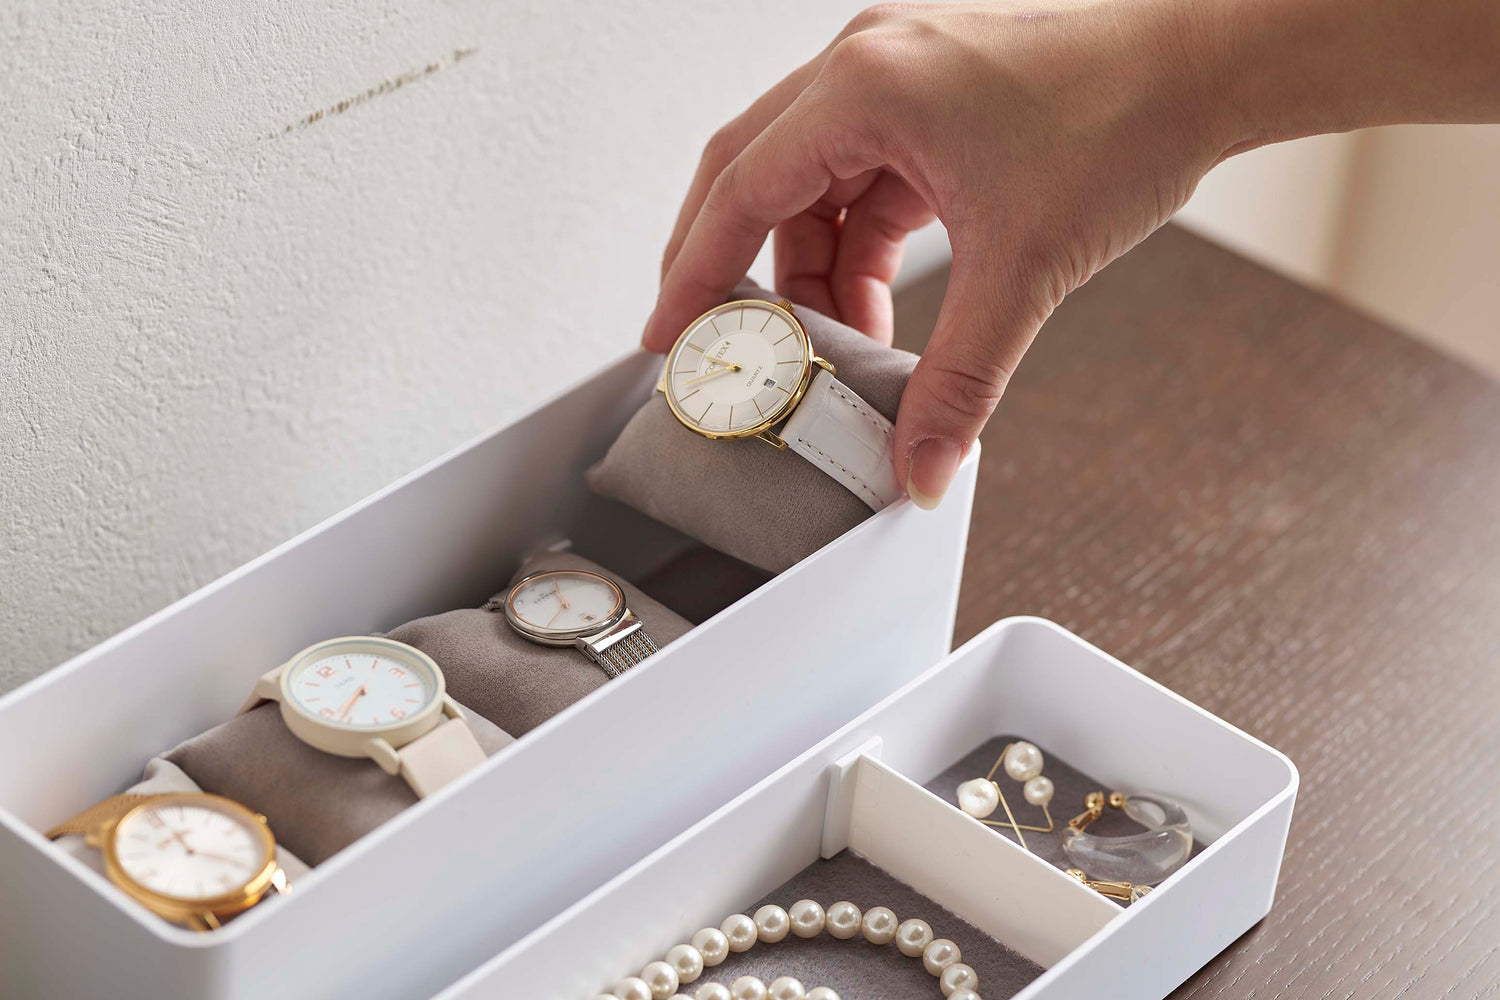 View 24 - White Stacking Watch and Accessory Case opened with removable watch cushion